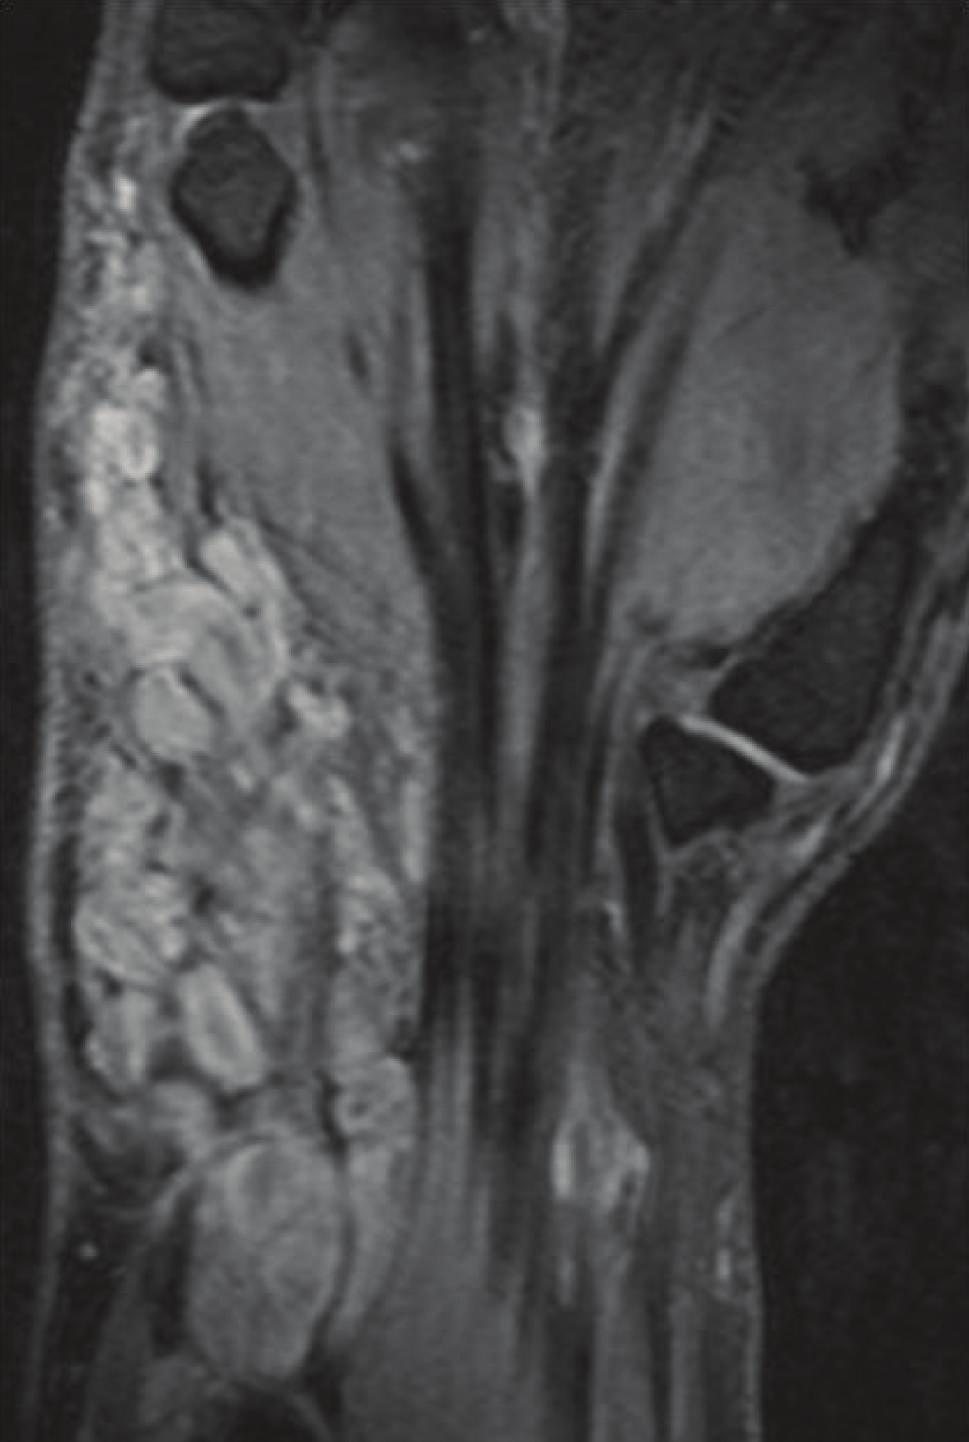 Case Reports in Radiology 3 FD (a) (b) Figure 3: Coronal T2-weighted wrist MRI with fat suppression (3a) anterior section: multilobulated mass abutting flexor digitorum longus (FD).